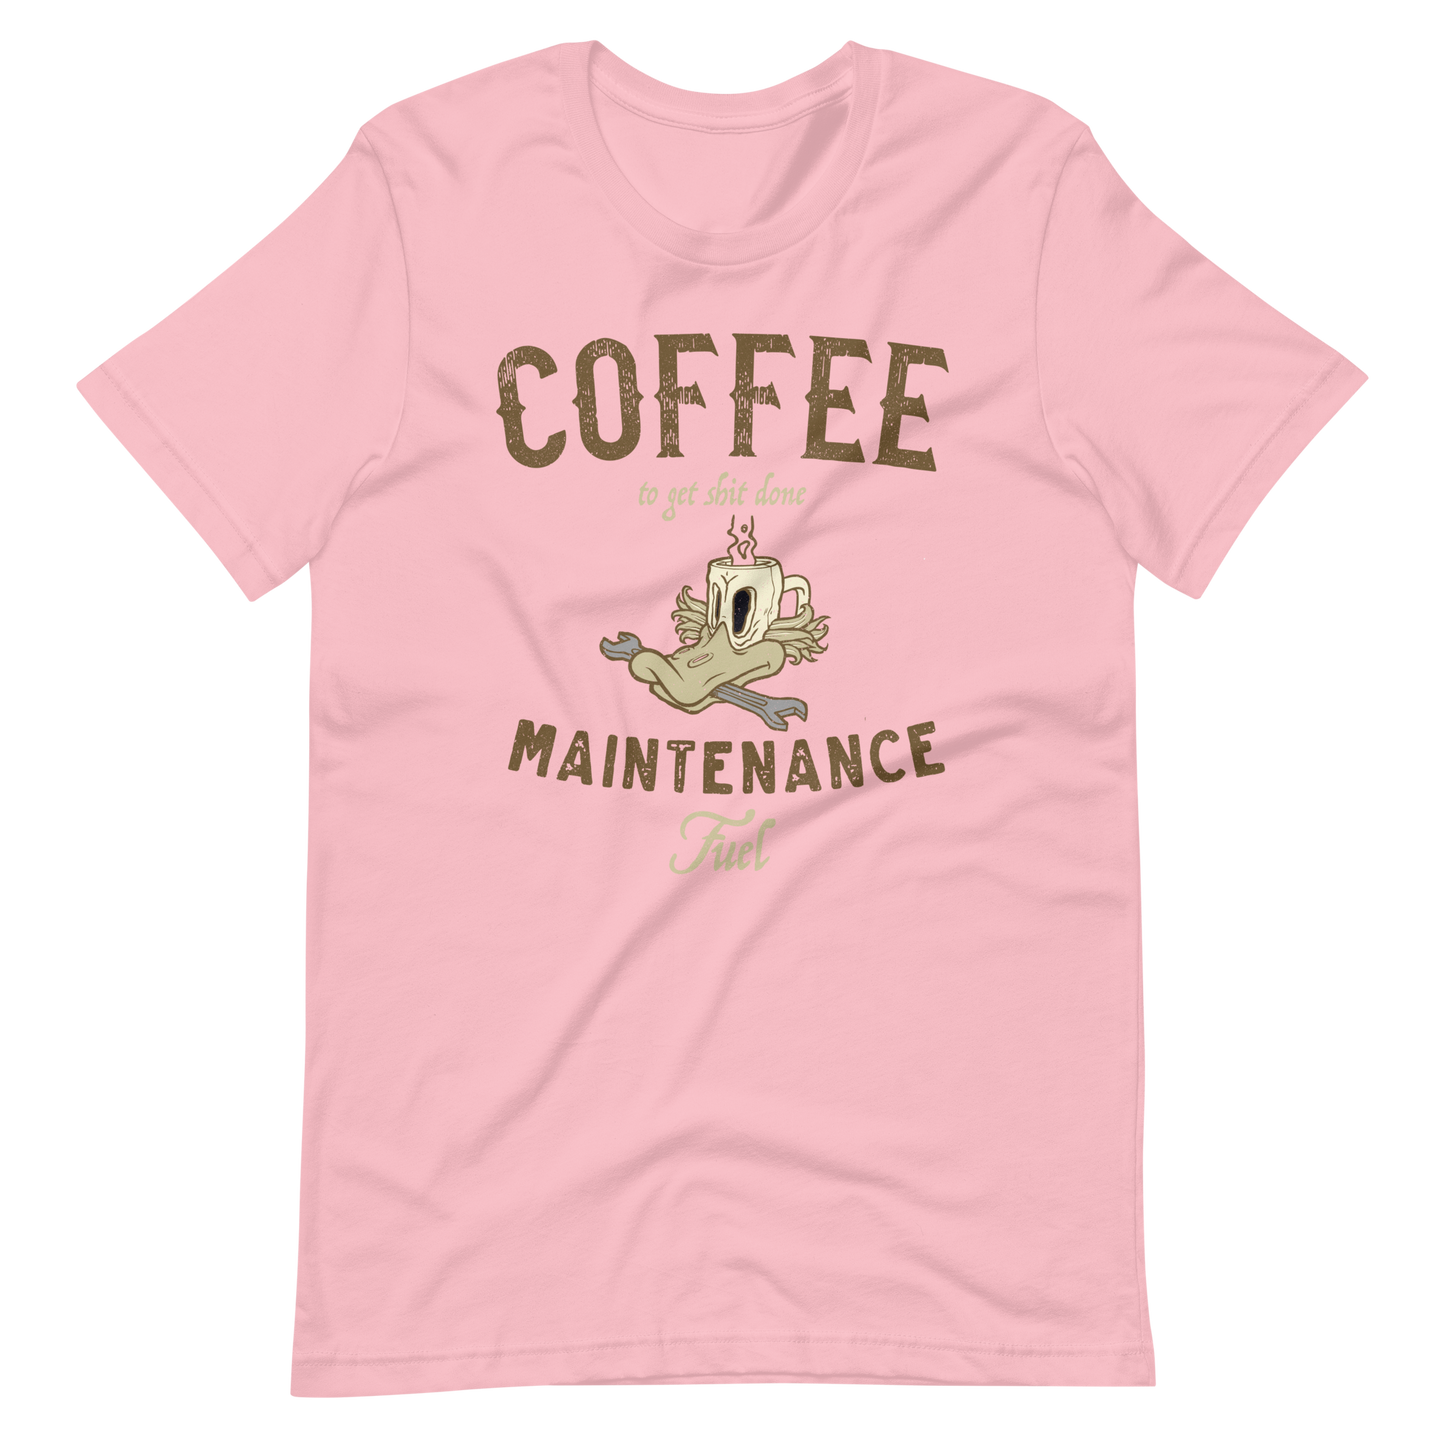 Pink Coffee Maintenance Fuel T-shirt Coffee And Bikes Shirt Cafe Racer Shirt Hard Work And Coffee Lover Get The Shit Done Coffee Biker Shirt